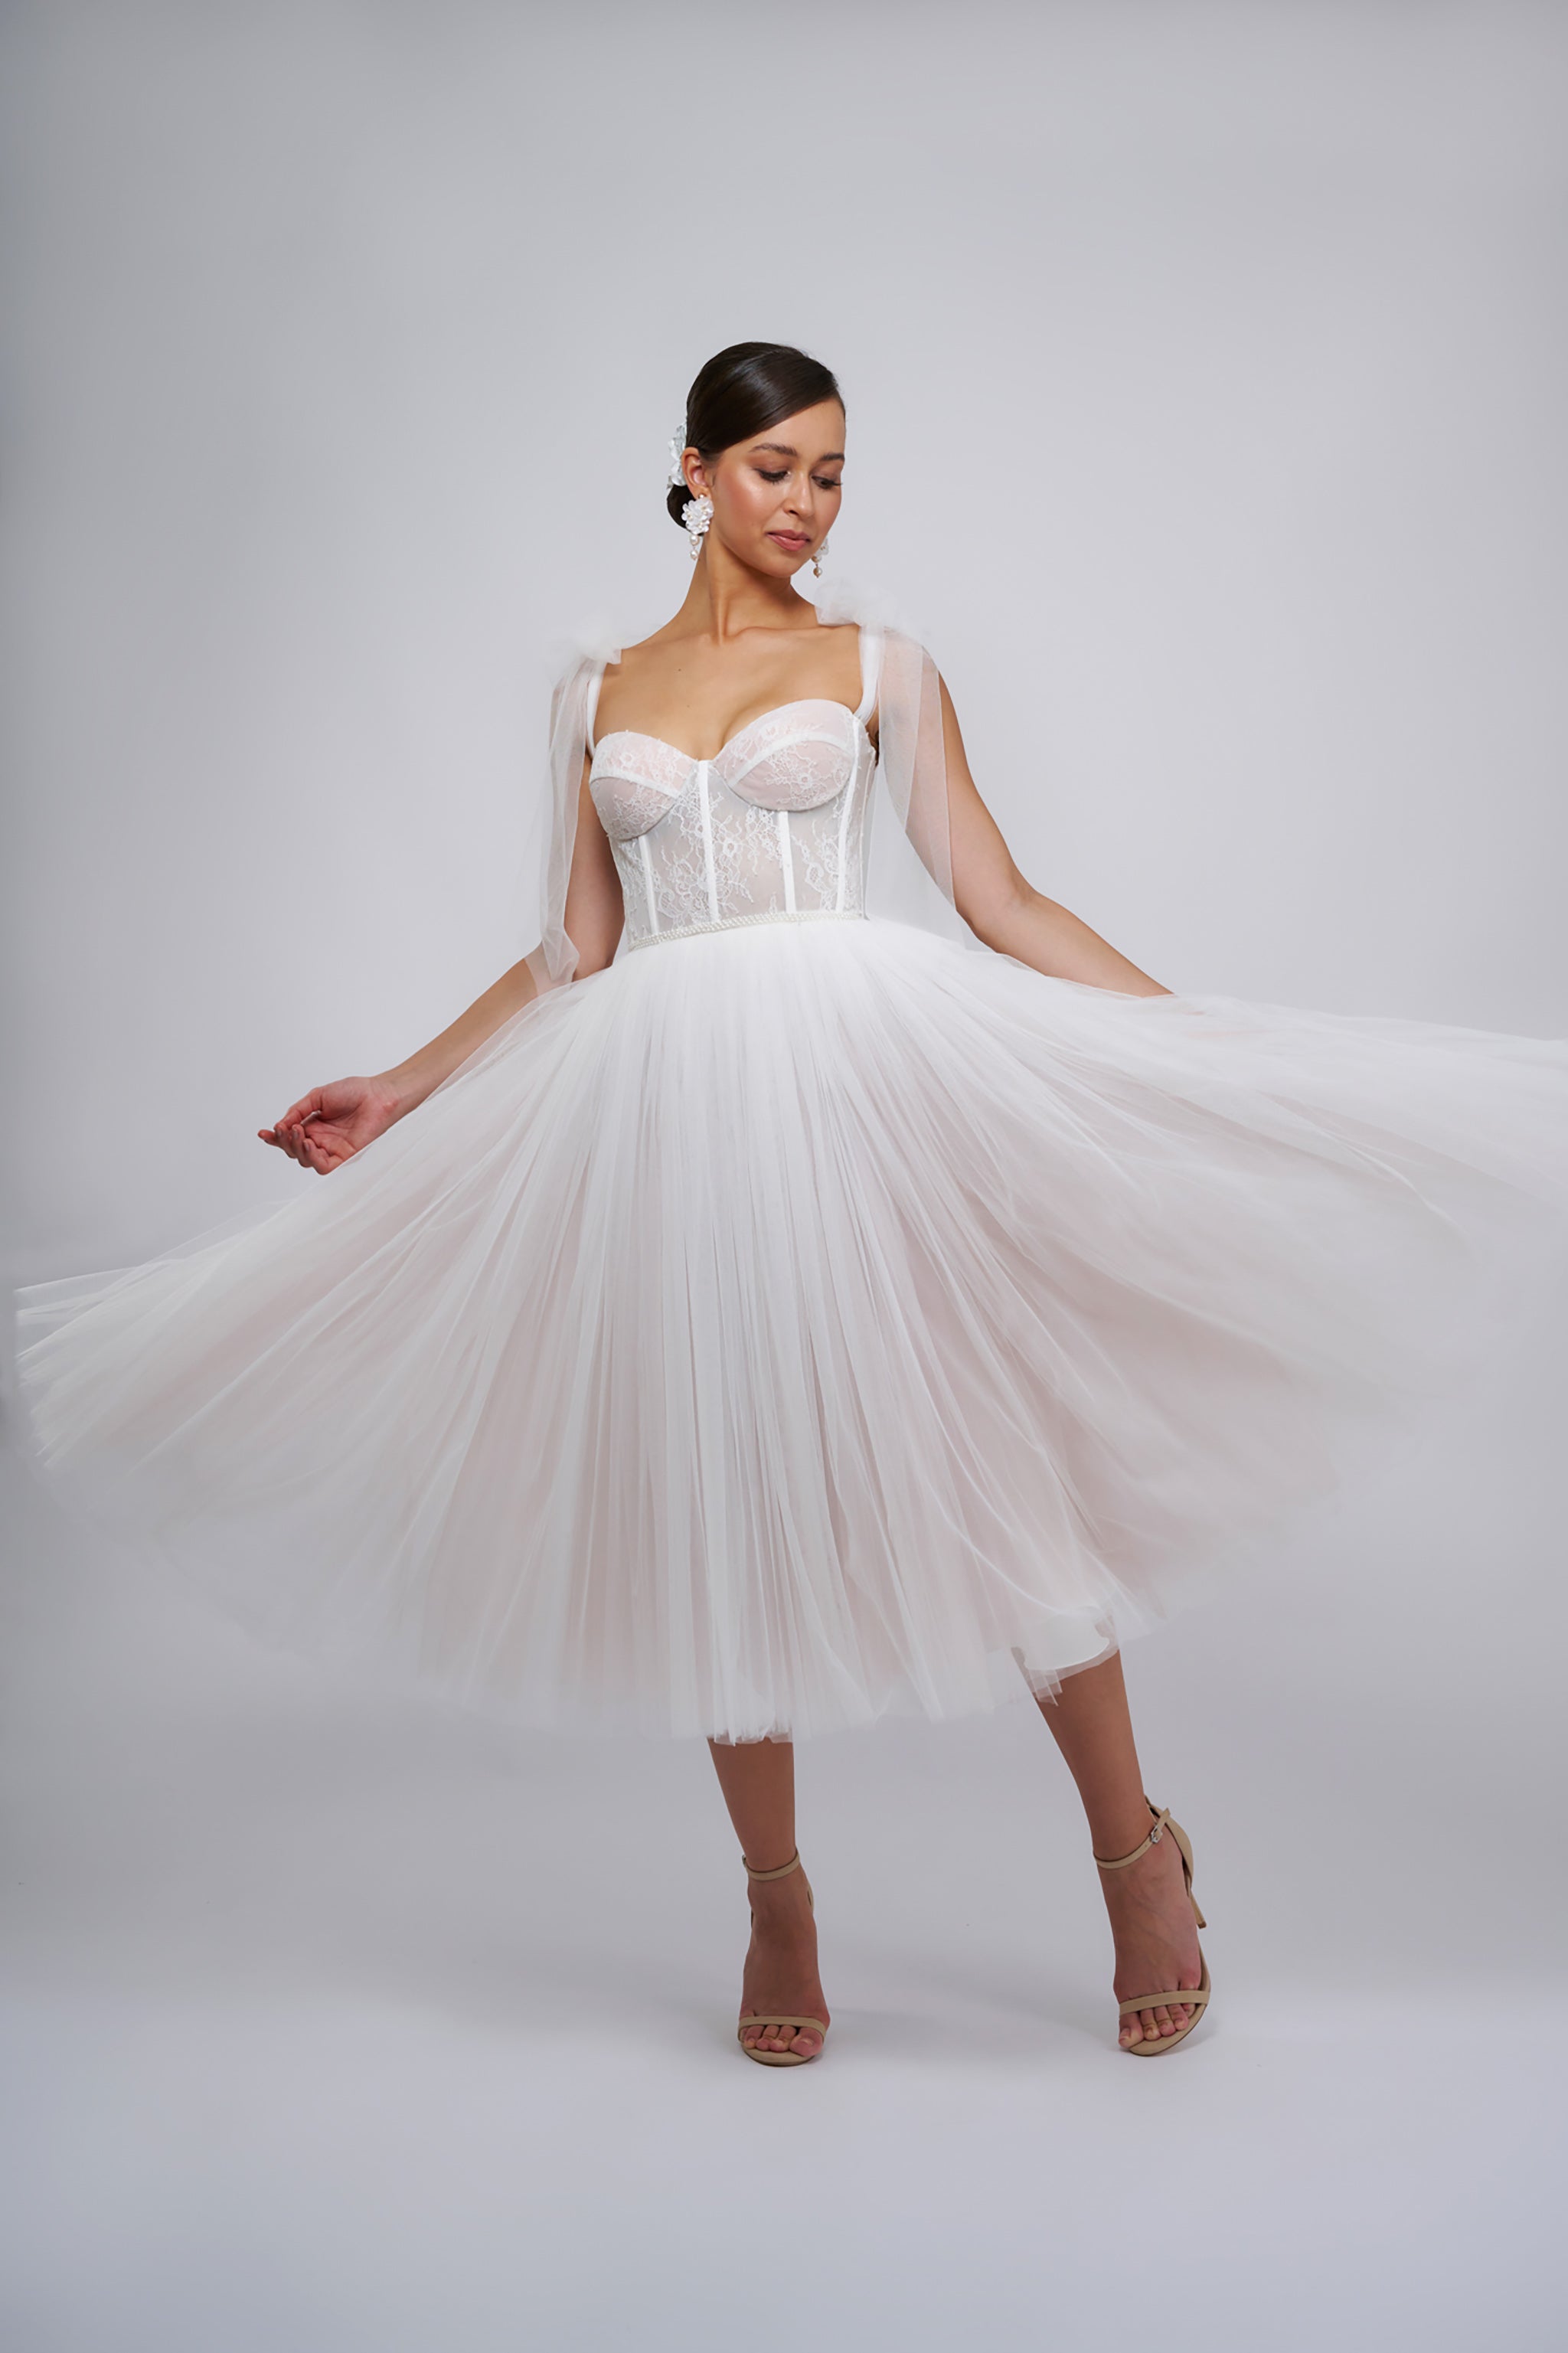 woman in her wedding dress featuring flowing tulle skirt and lace corset with shoulder straps wearing high heel shoes dancing in a white room at her wedding